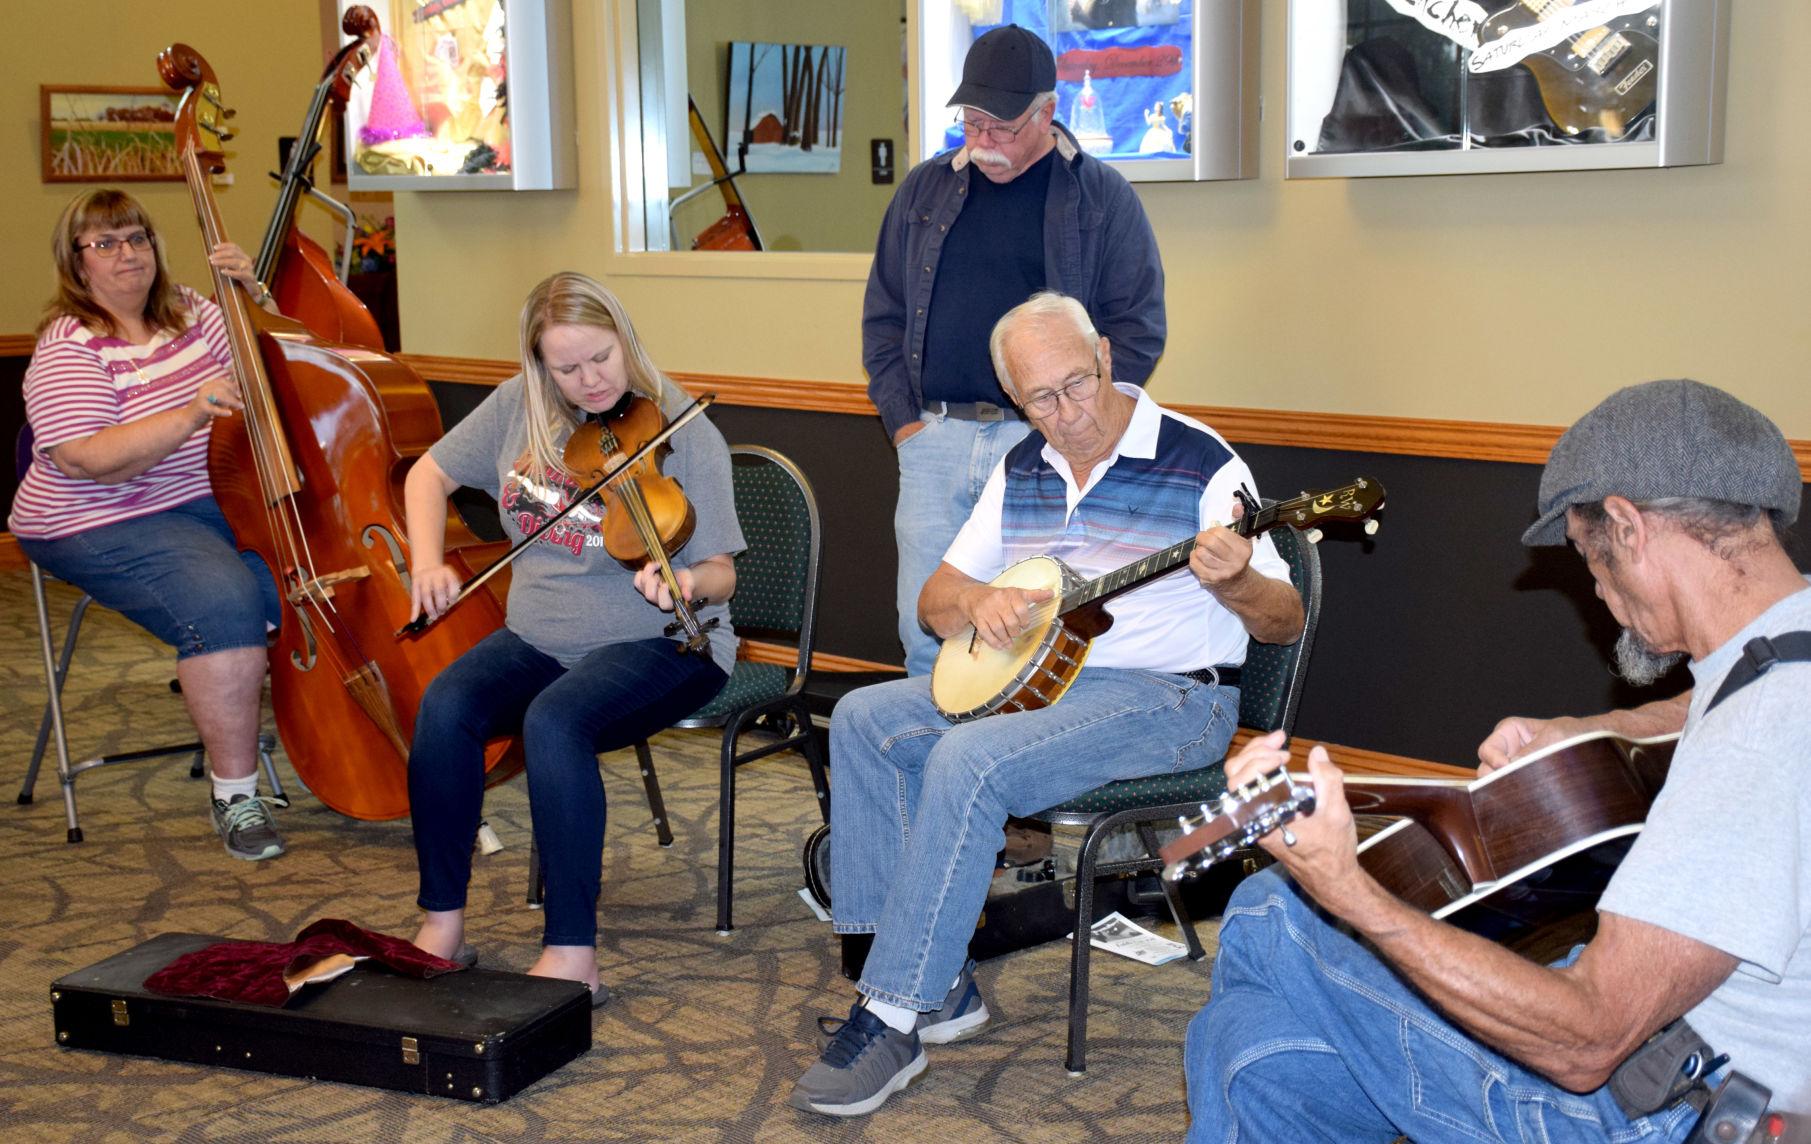 Fiddle Fest and Contest Oct. 26, 27 at EPC Lifestyles